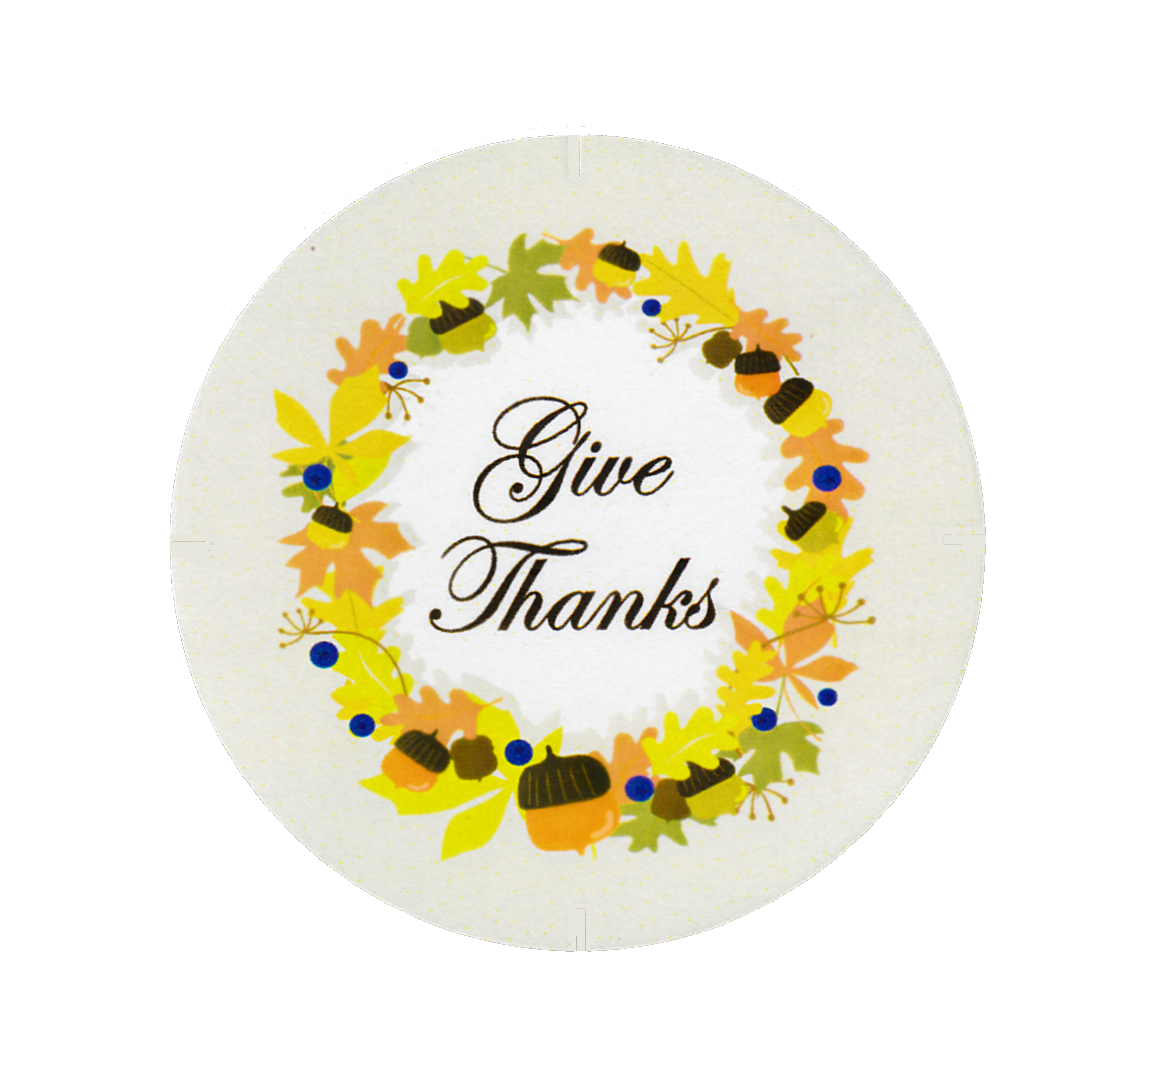 Give Thanks 1 - Granny Kate's